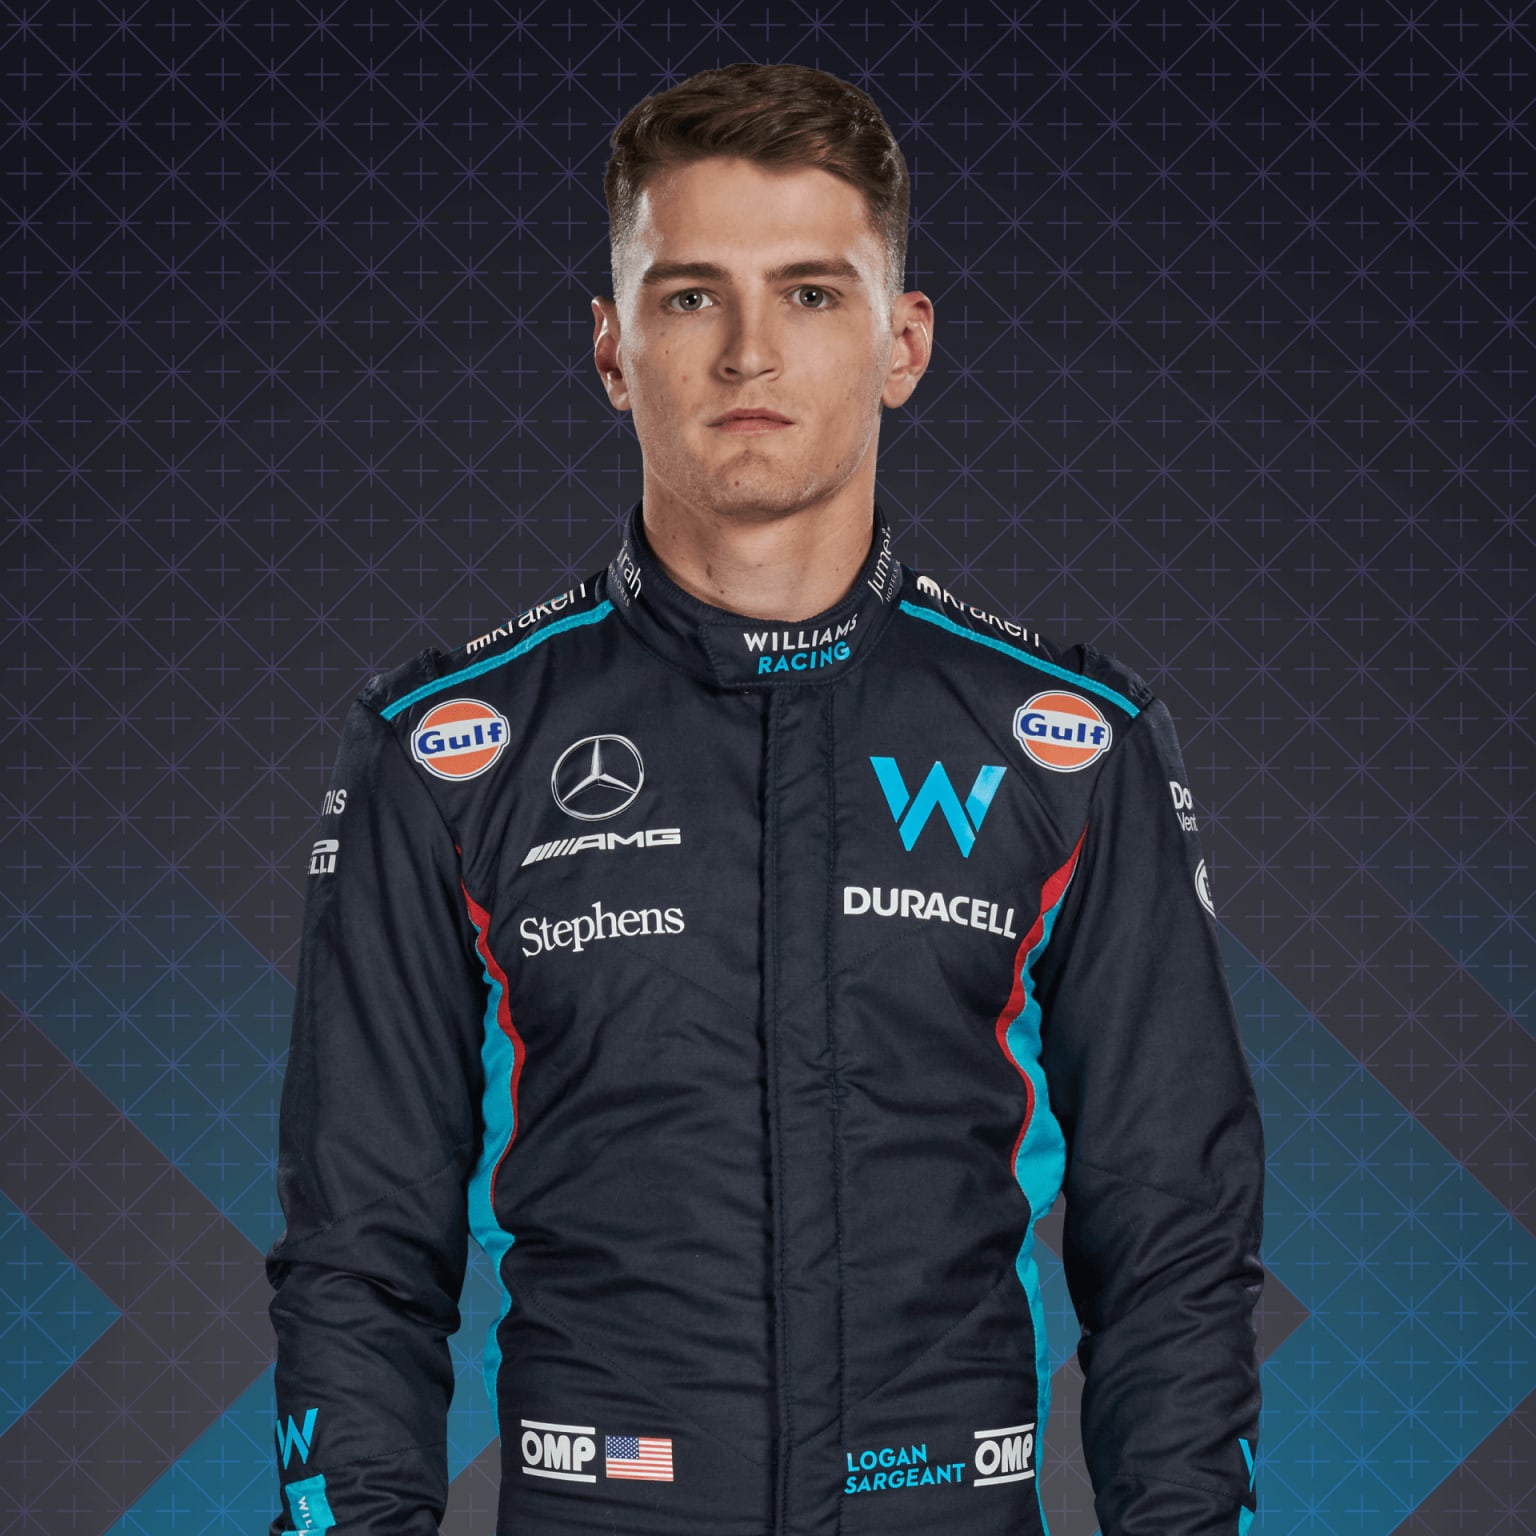 Logan Sargeant - F1 Driver for Williams